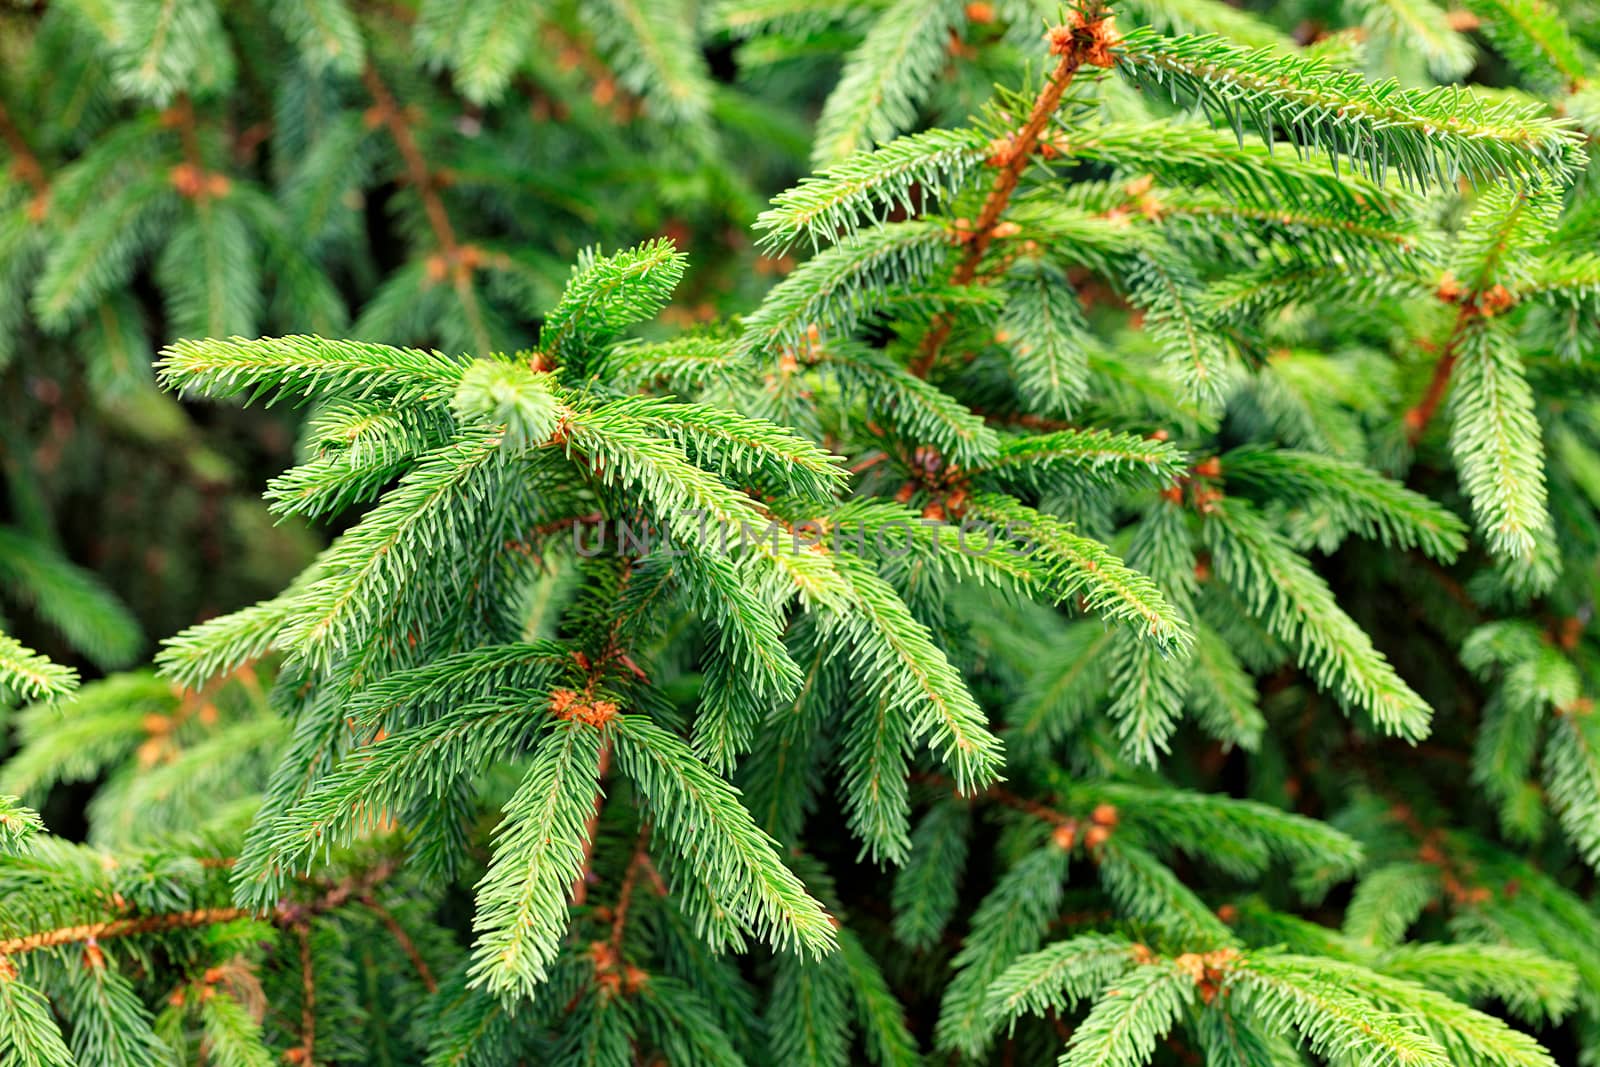 Fresh light green spruce branches in the garden close-up. Nature concept for design. Selective focus. Place for text.